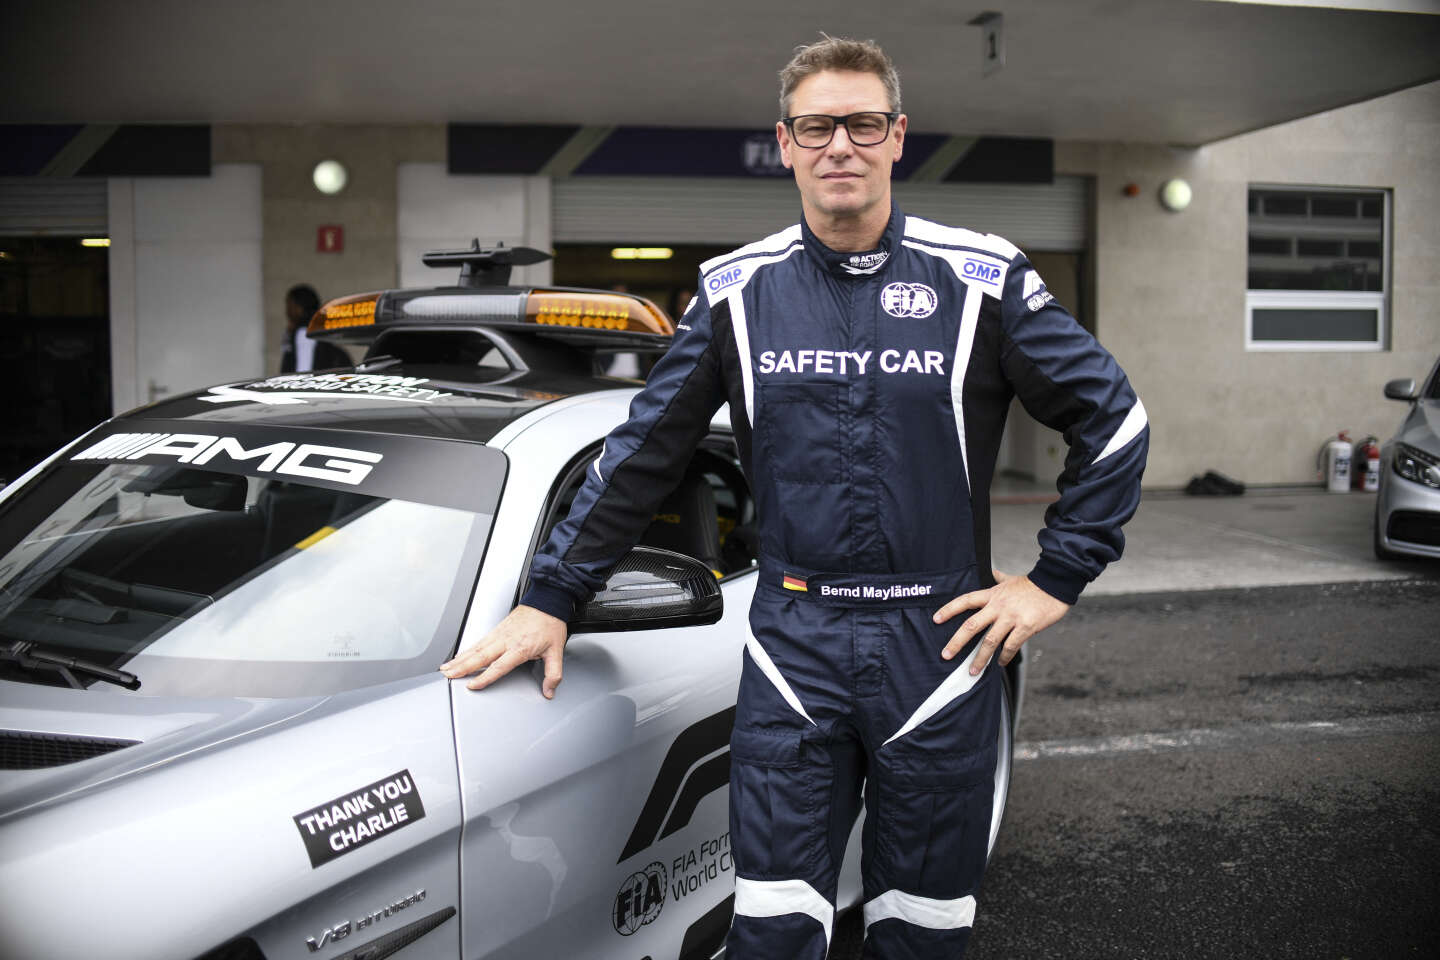 Bernd Mayländer, safety car driver and single-seater tamer